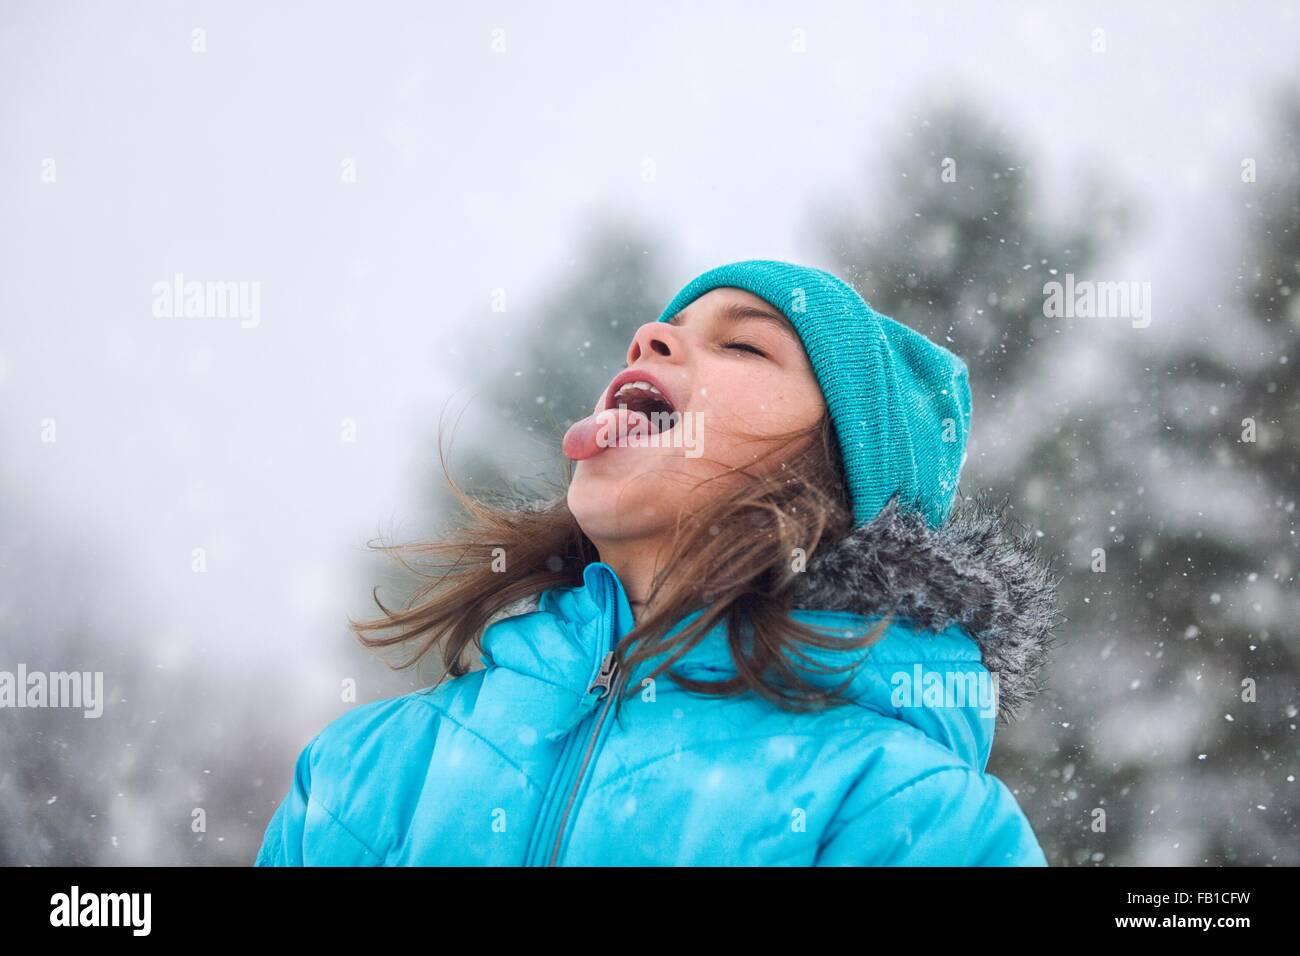 Girl looking up, sticking out tongue catching snowflakes Stock Photo